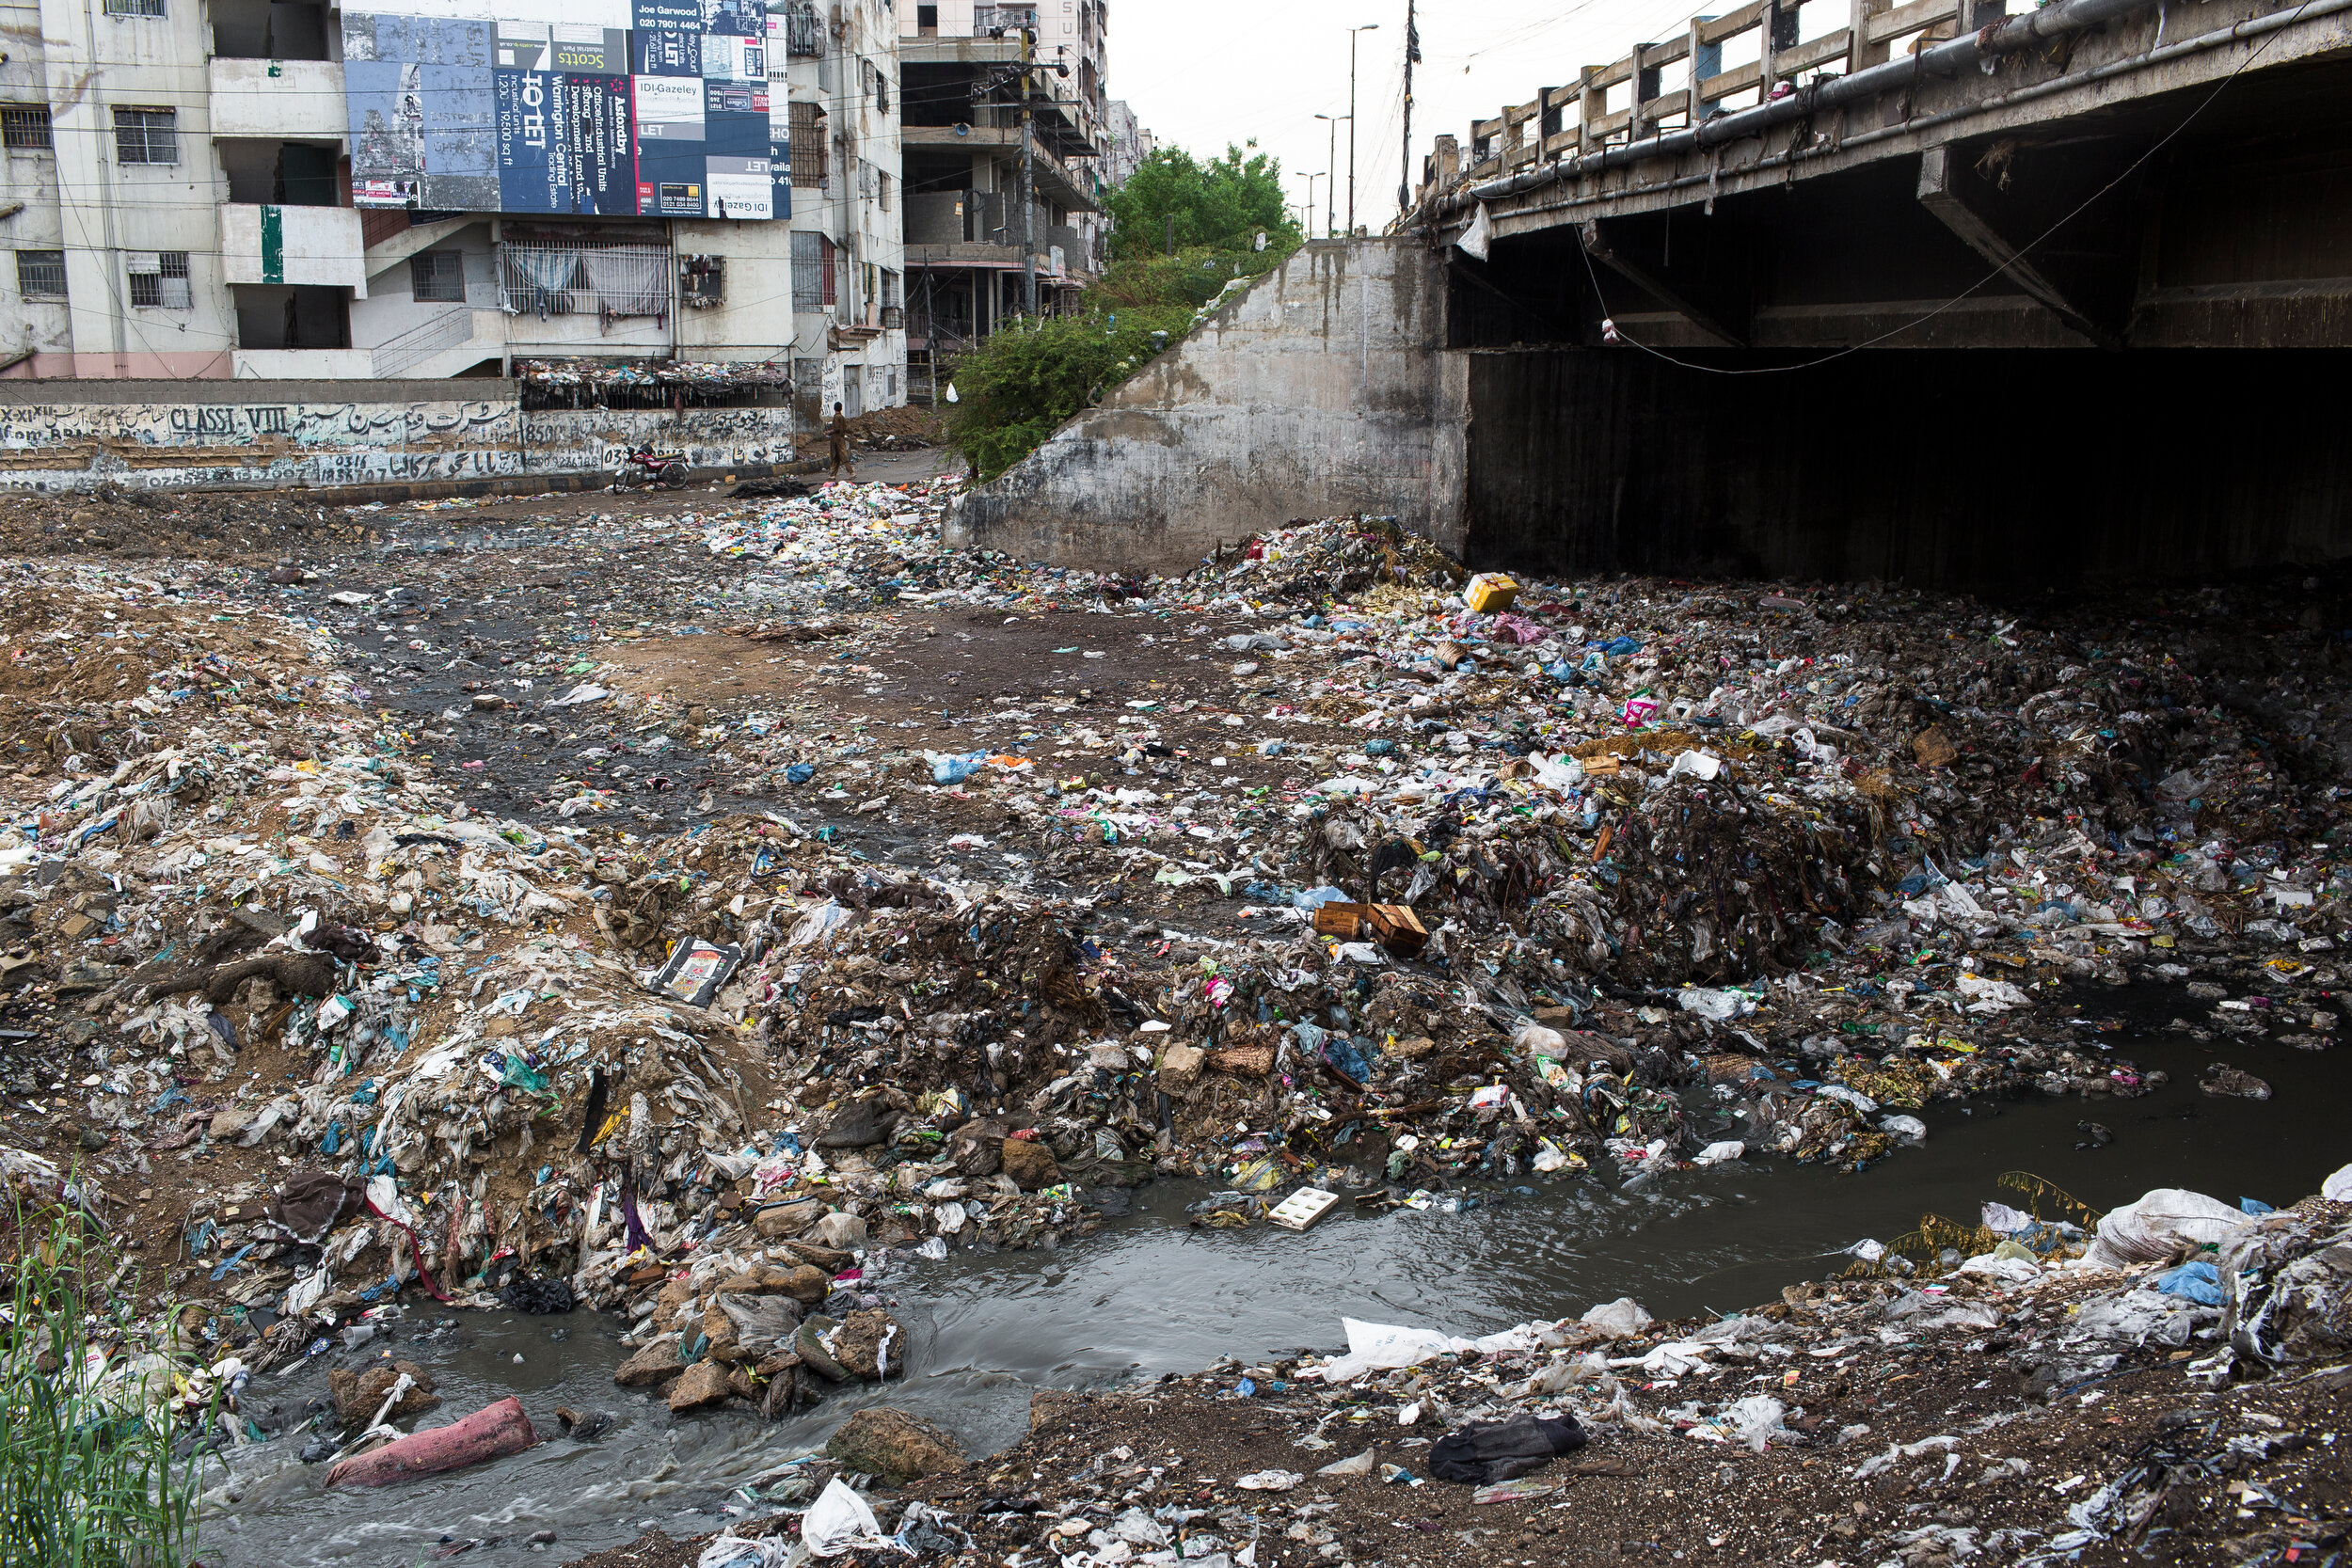  A riverbed in Karachi now overrun with sewage and garbage.  